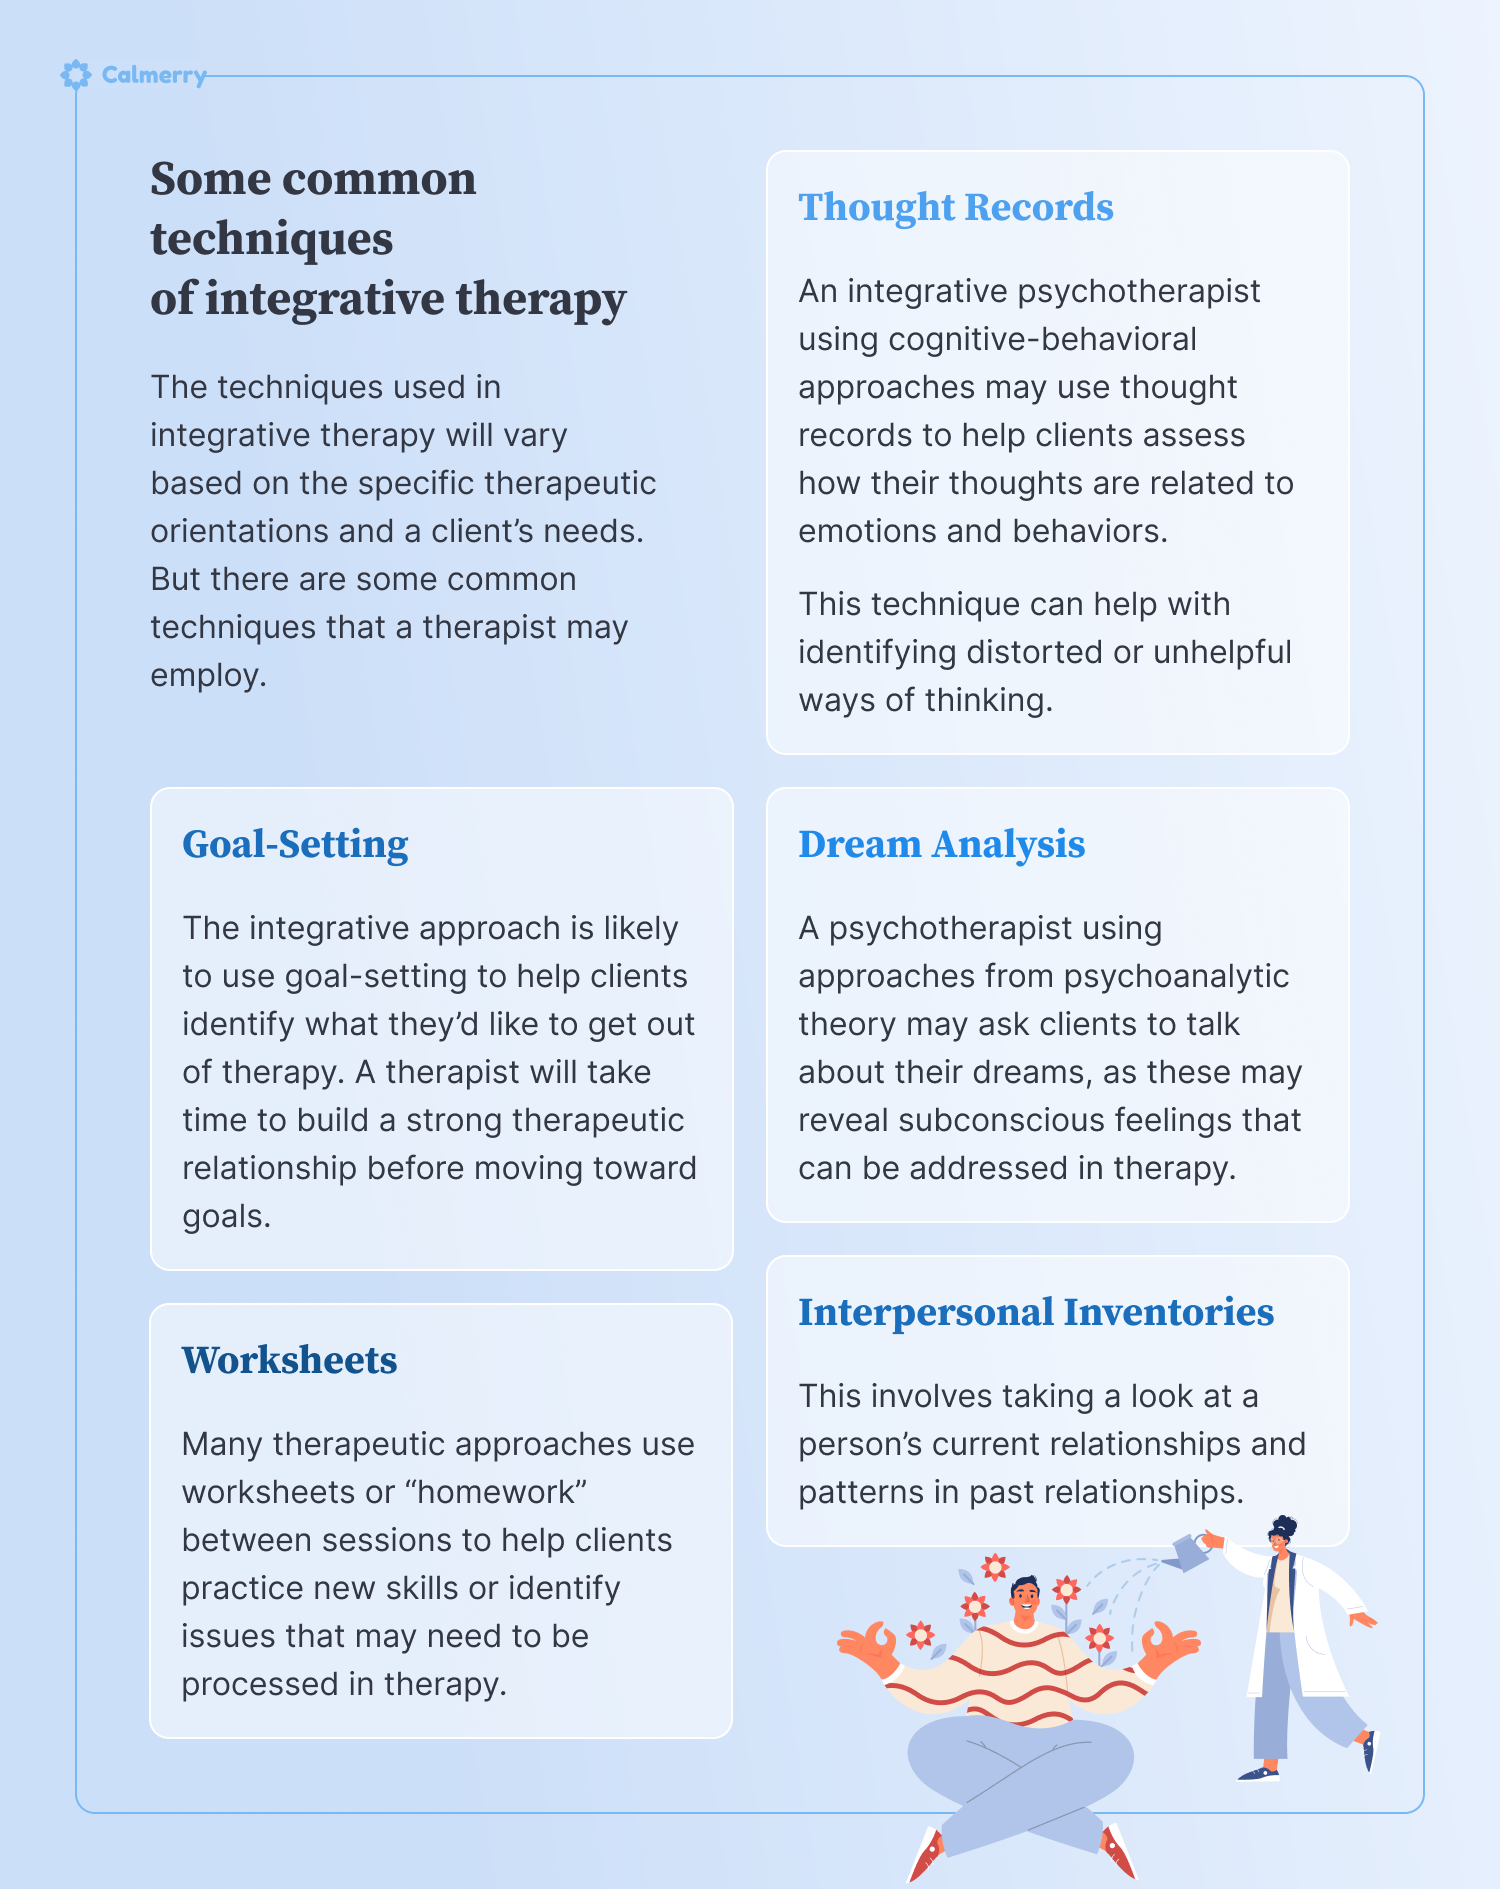 Some common techniques of integrative therapy The techniques used in integrative therapy will vary based on the specific therapeutic orientations and a client’s needs. But there are some common techniques that a therapist may employ. Thought Records An integrative psychotherapist using cognitive-behavioral approaches may use thought records to help clients assess how their thoughts are related to emotions and behaviors. This technique can help with identifying distorted or unhelpful ways of thinking. Dream Analysis A psychotherapist using approaches from psychoanalytic theory may ask clients to talk about their dreams, as these may reveal subconscious feelings that can be addressed in therapy. Goal-Setting The integrative approach is likely to use goal-setting to help clients identify what they’d like to get out of therapy. A therapist will take time to build a strong therapeutic relationship before moving toward goals. Interpersonal Inventories This involves taking a look at a person’s current relationships and patterns in past relationships. Worksheets Many therapeutic approaches use worksheets or “homework” between sessions to help clients practice new skills or identify issues that may need to be processed in therapy.